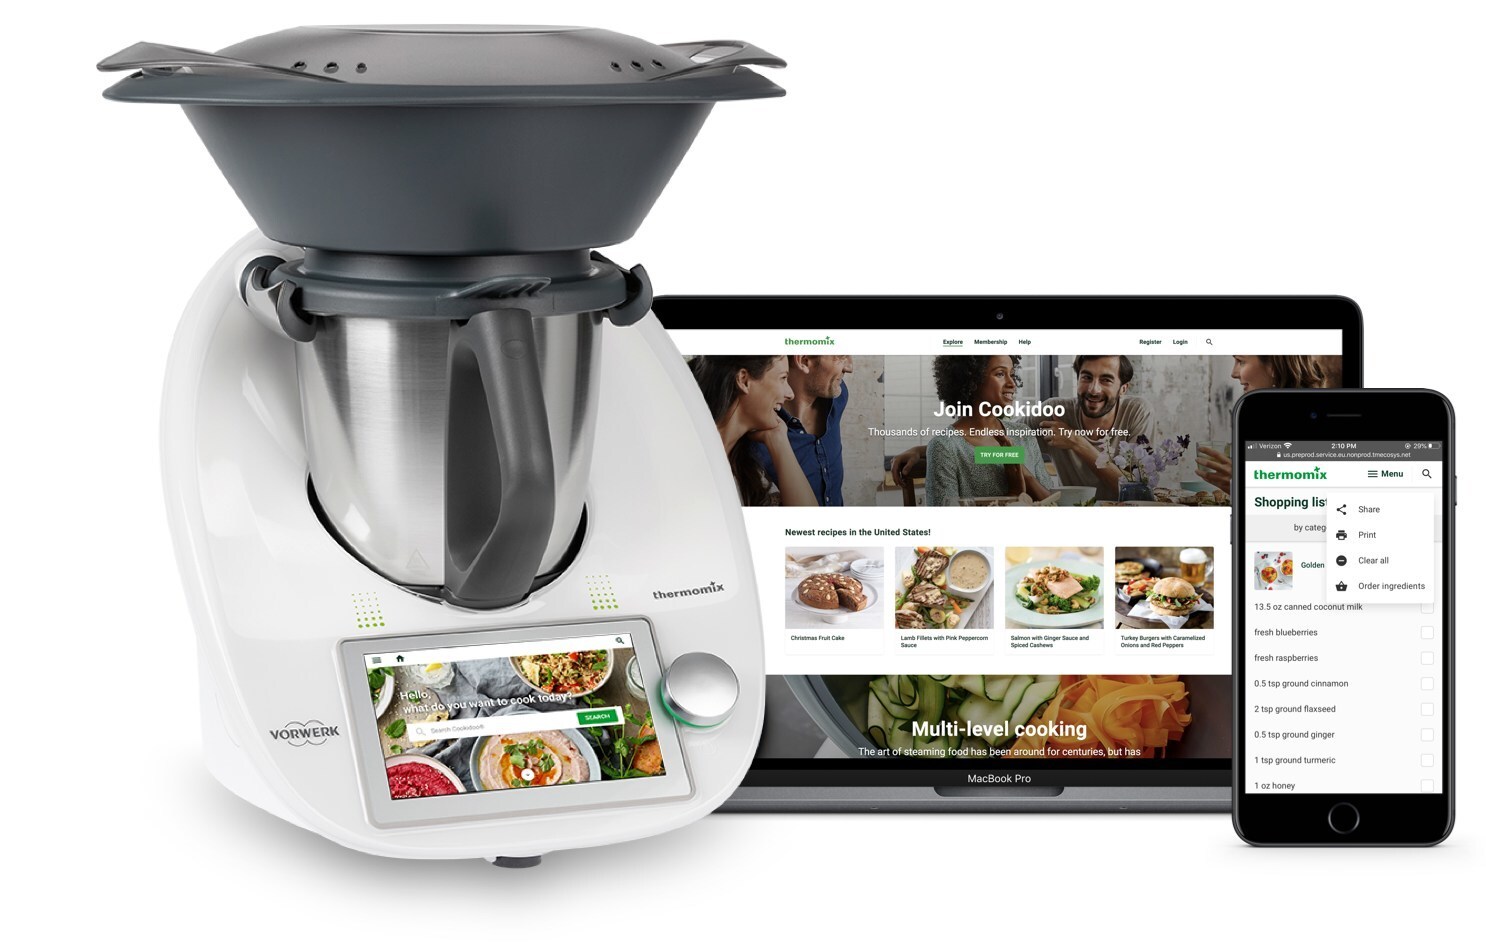 Direct seller Thermomix to move headquarters from California to Dallas